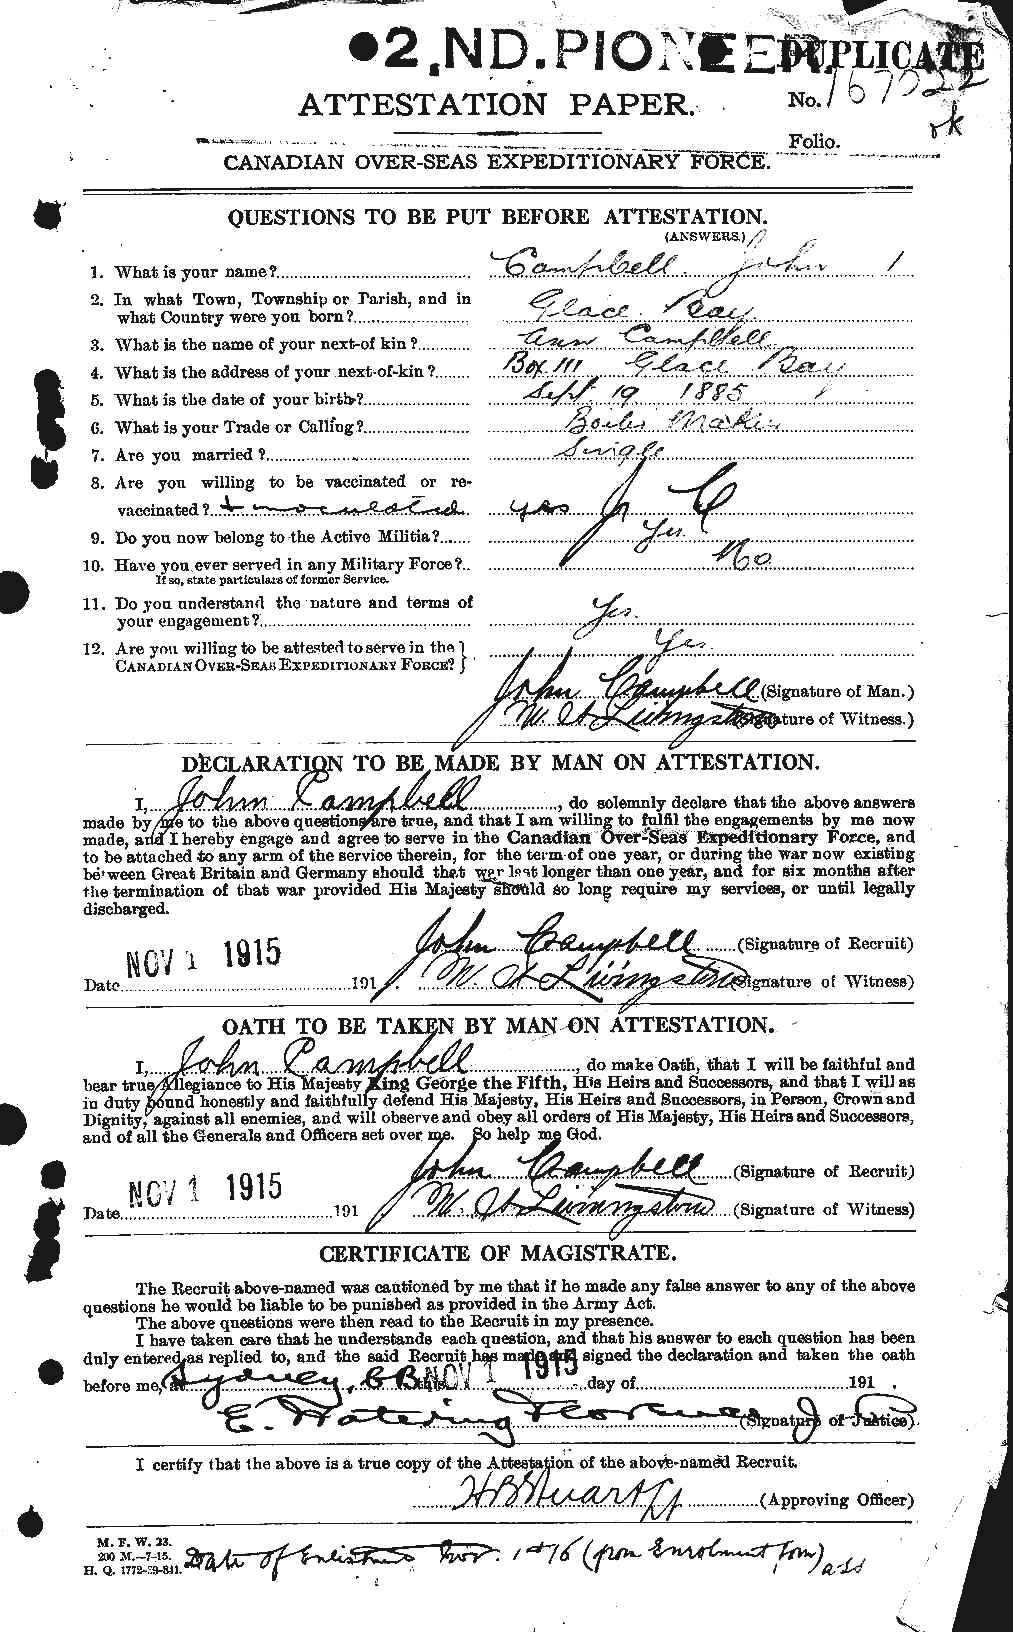 Personnel Records of the First World War - CEF 006848a